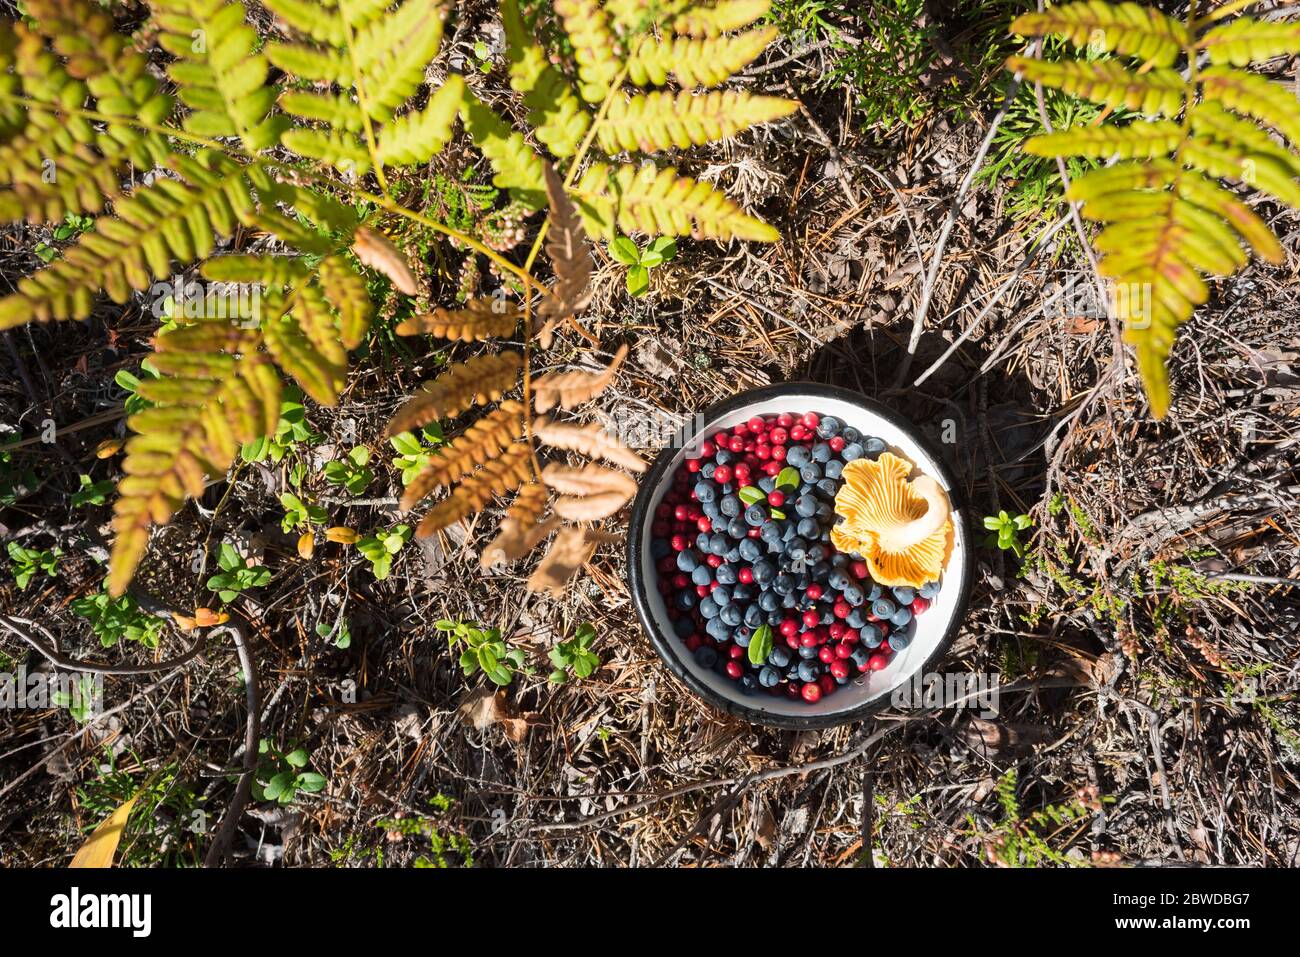 Bowl of forest berries (wild blueberries, lingonberries) with a chanterelle on the ground beside ferns. Stock Photo